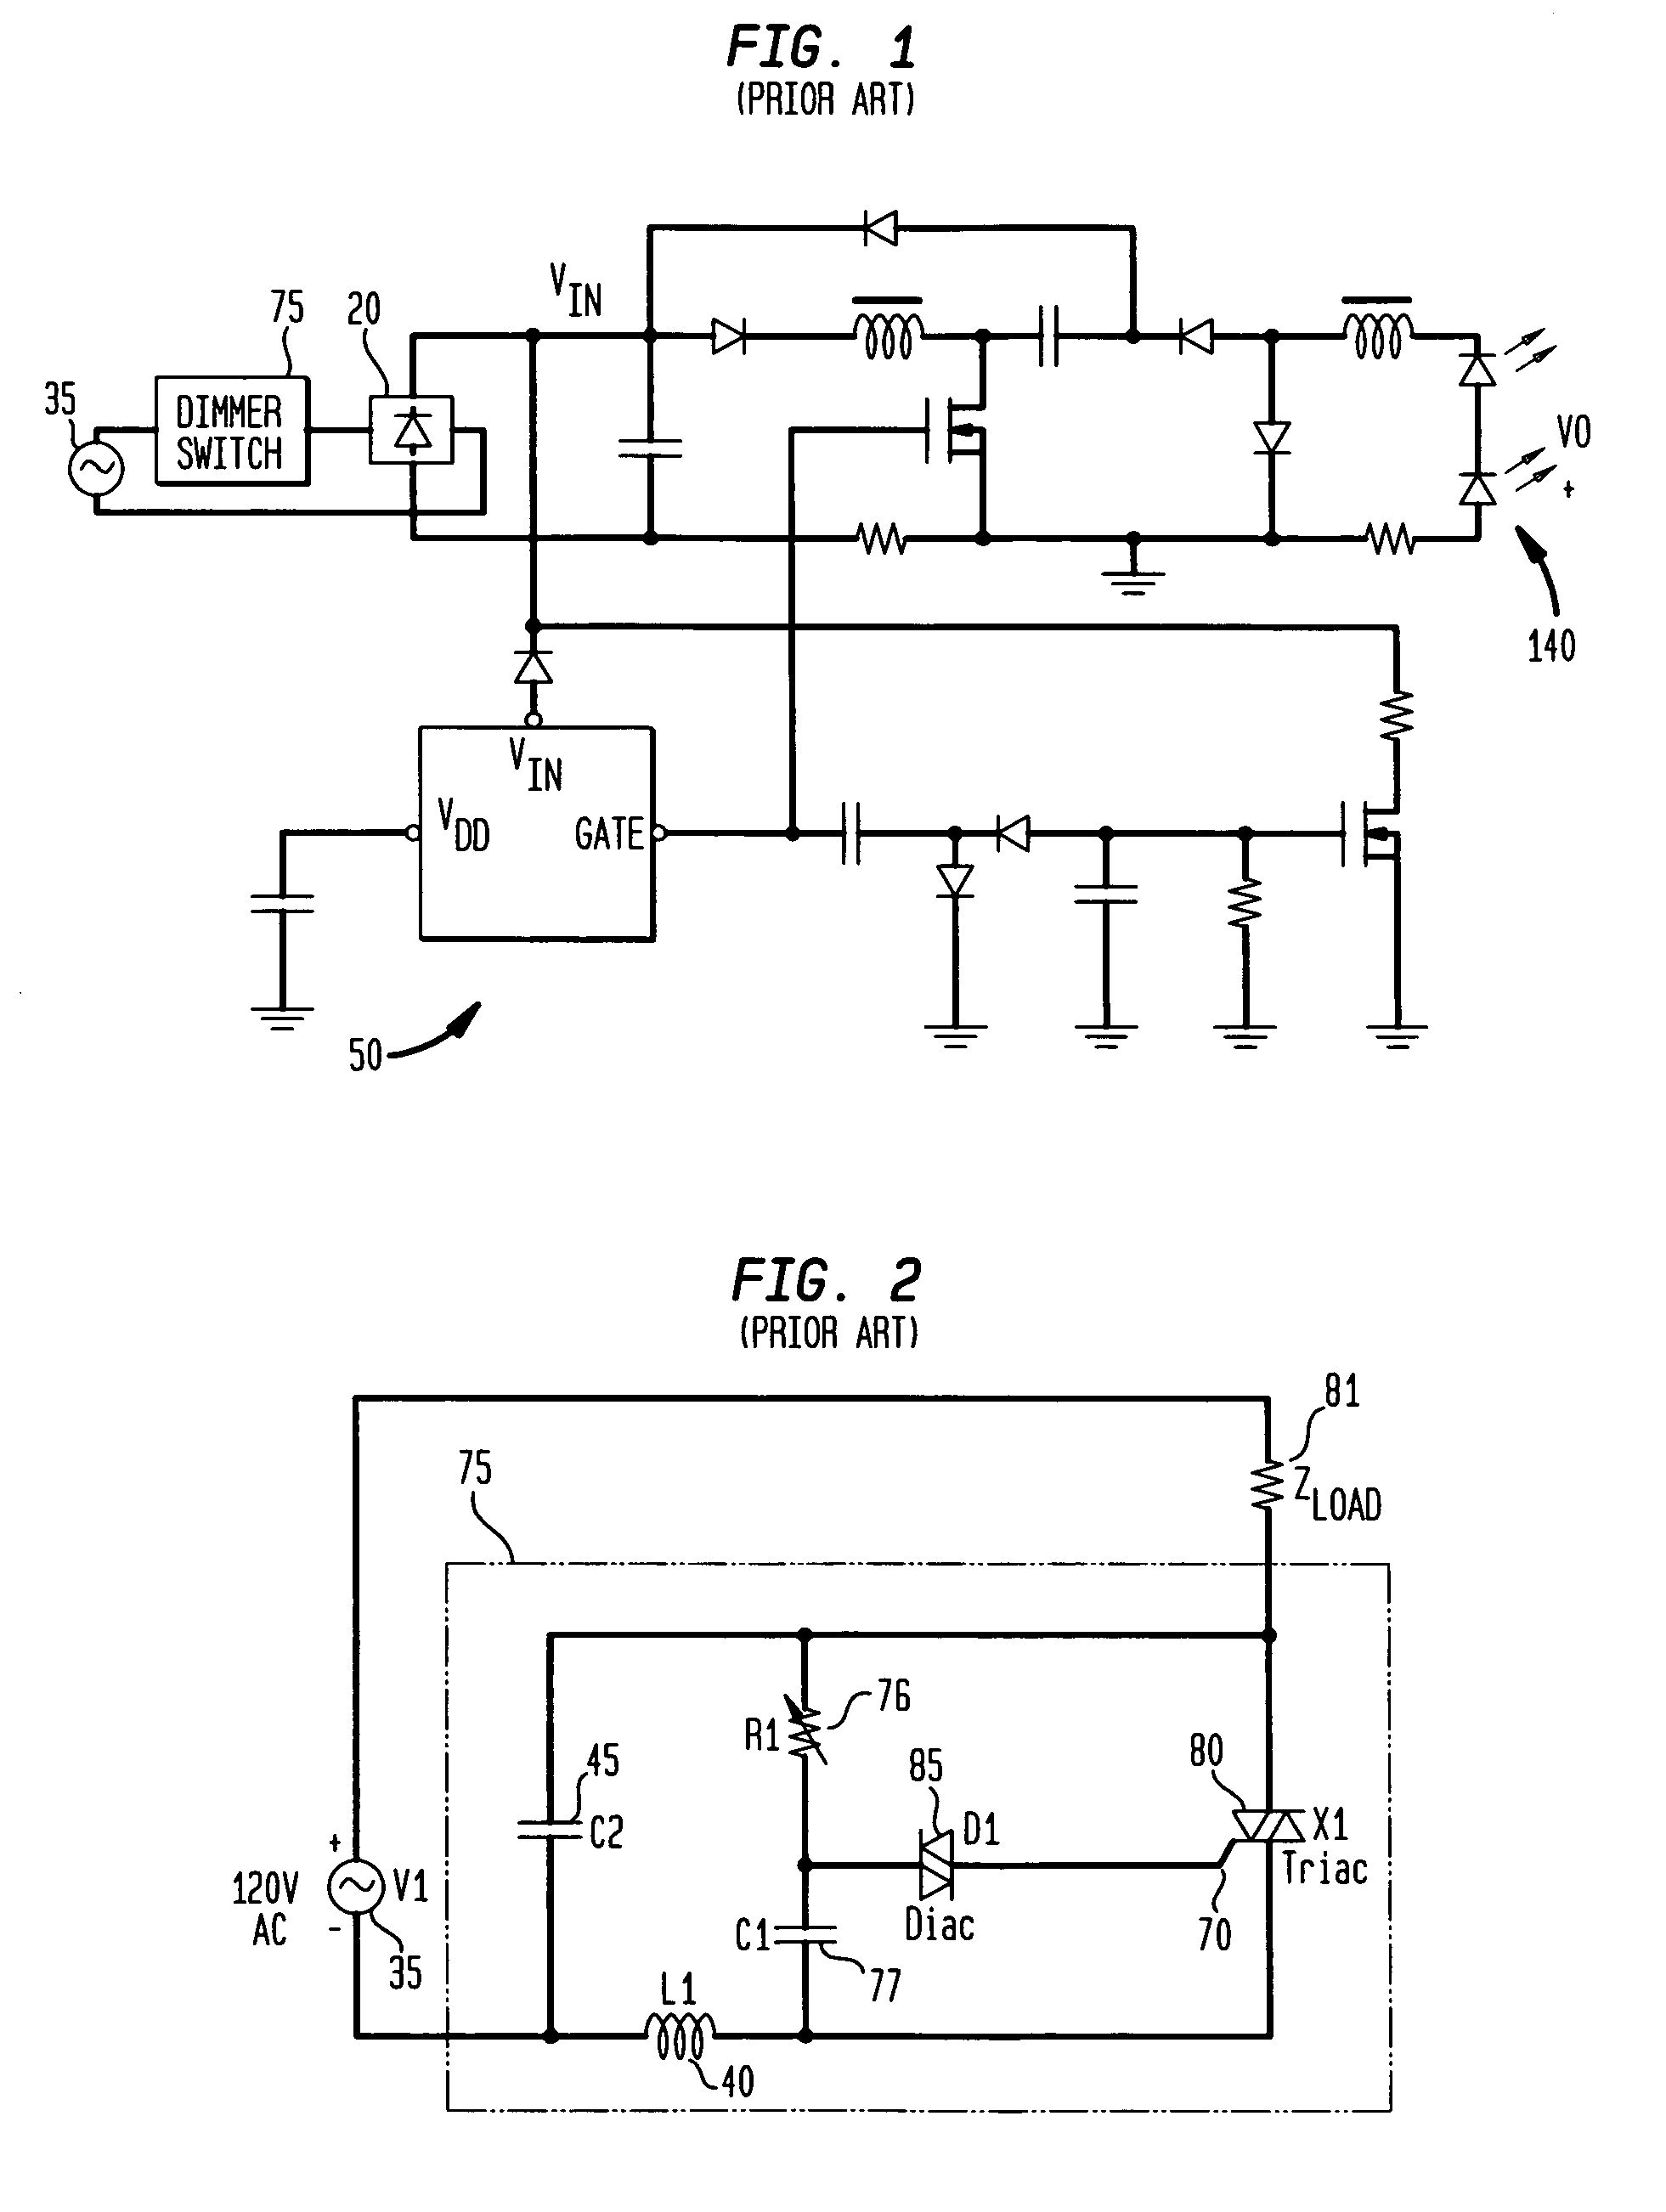 Impedance matching circuit for current regulation of solid state lighting